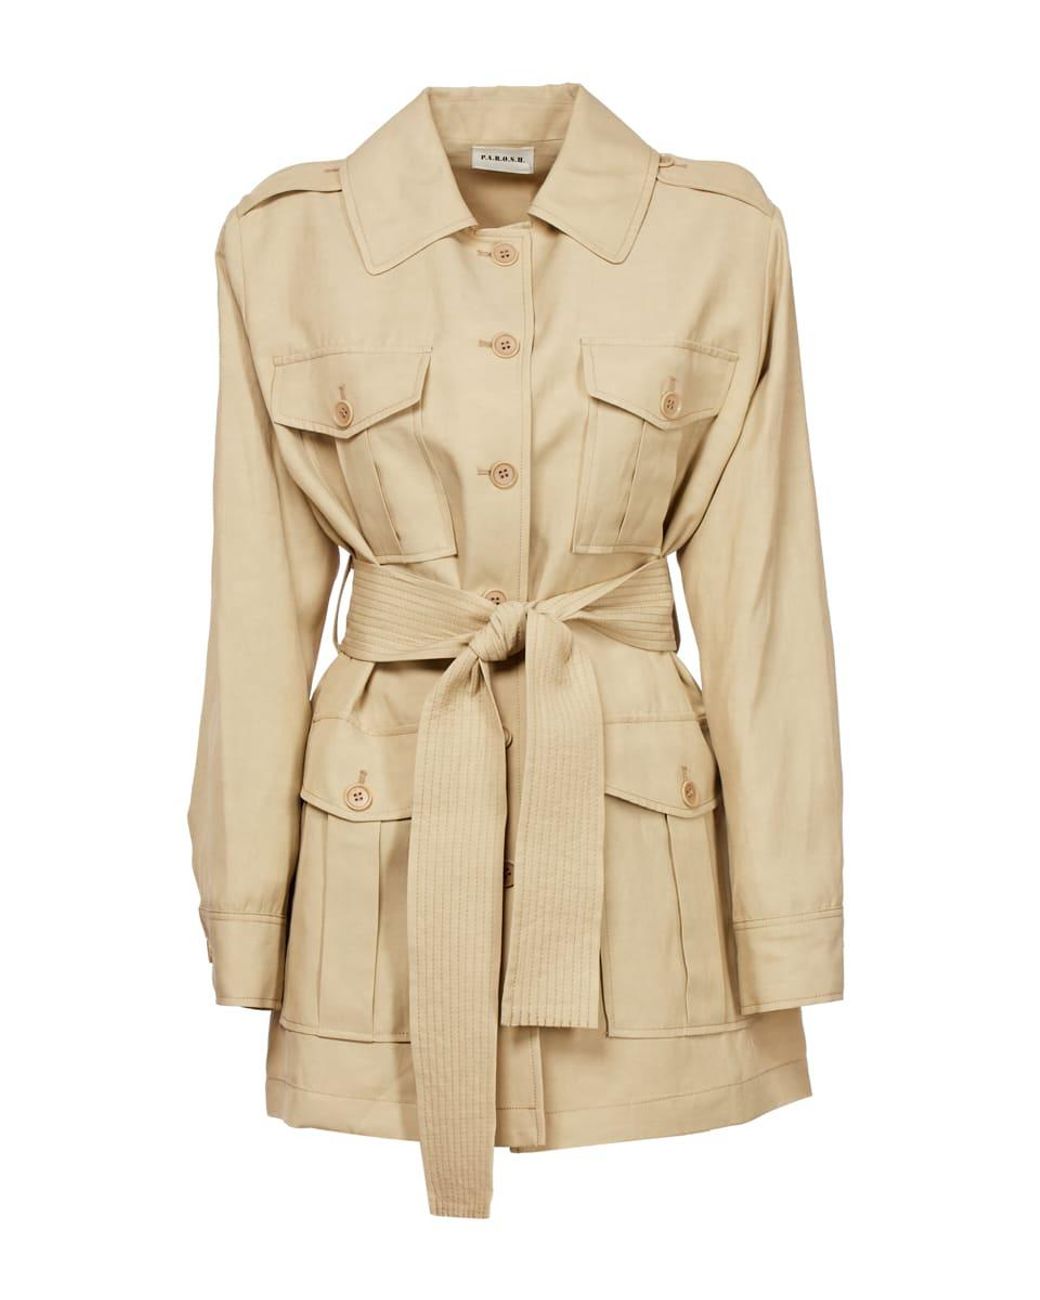 P.A.R.O.S.H. Synthetic Viscose Linen Saharian Jacket in Beige (Natural ...